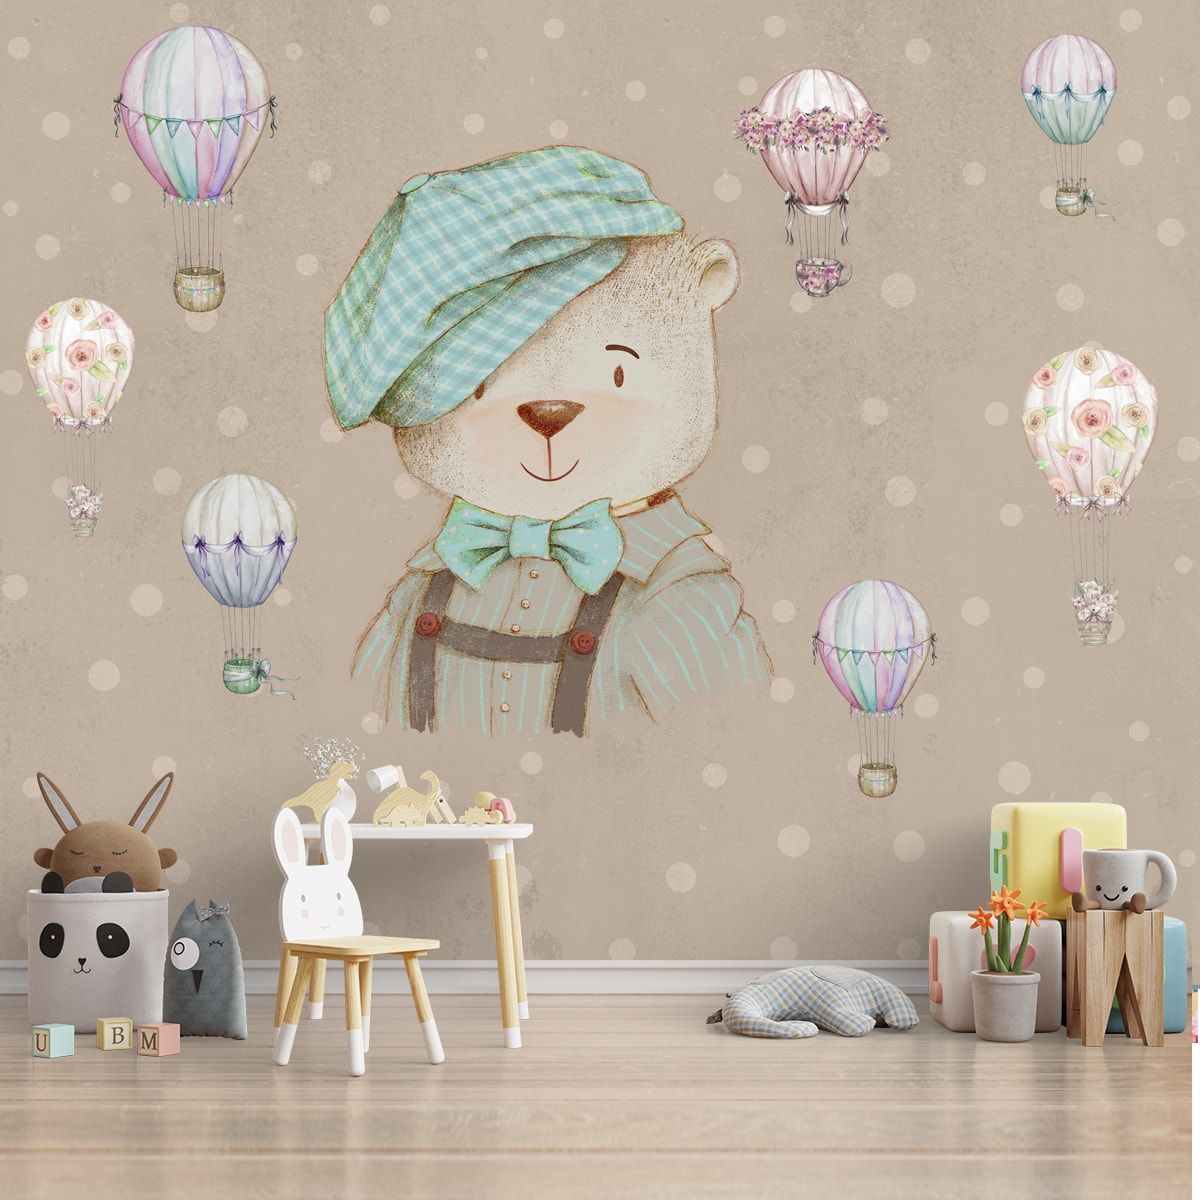 Cute Teddy Wall Mural for Kids Room, Customised for Homes